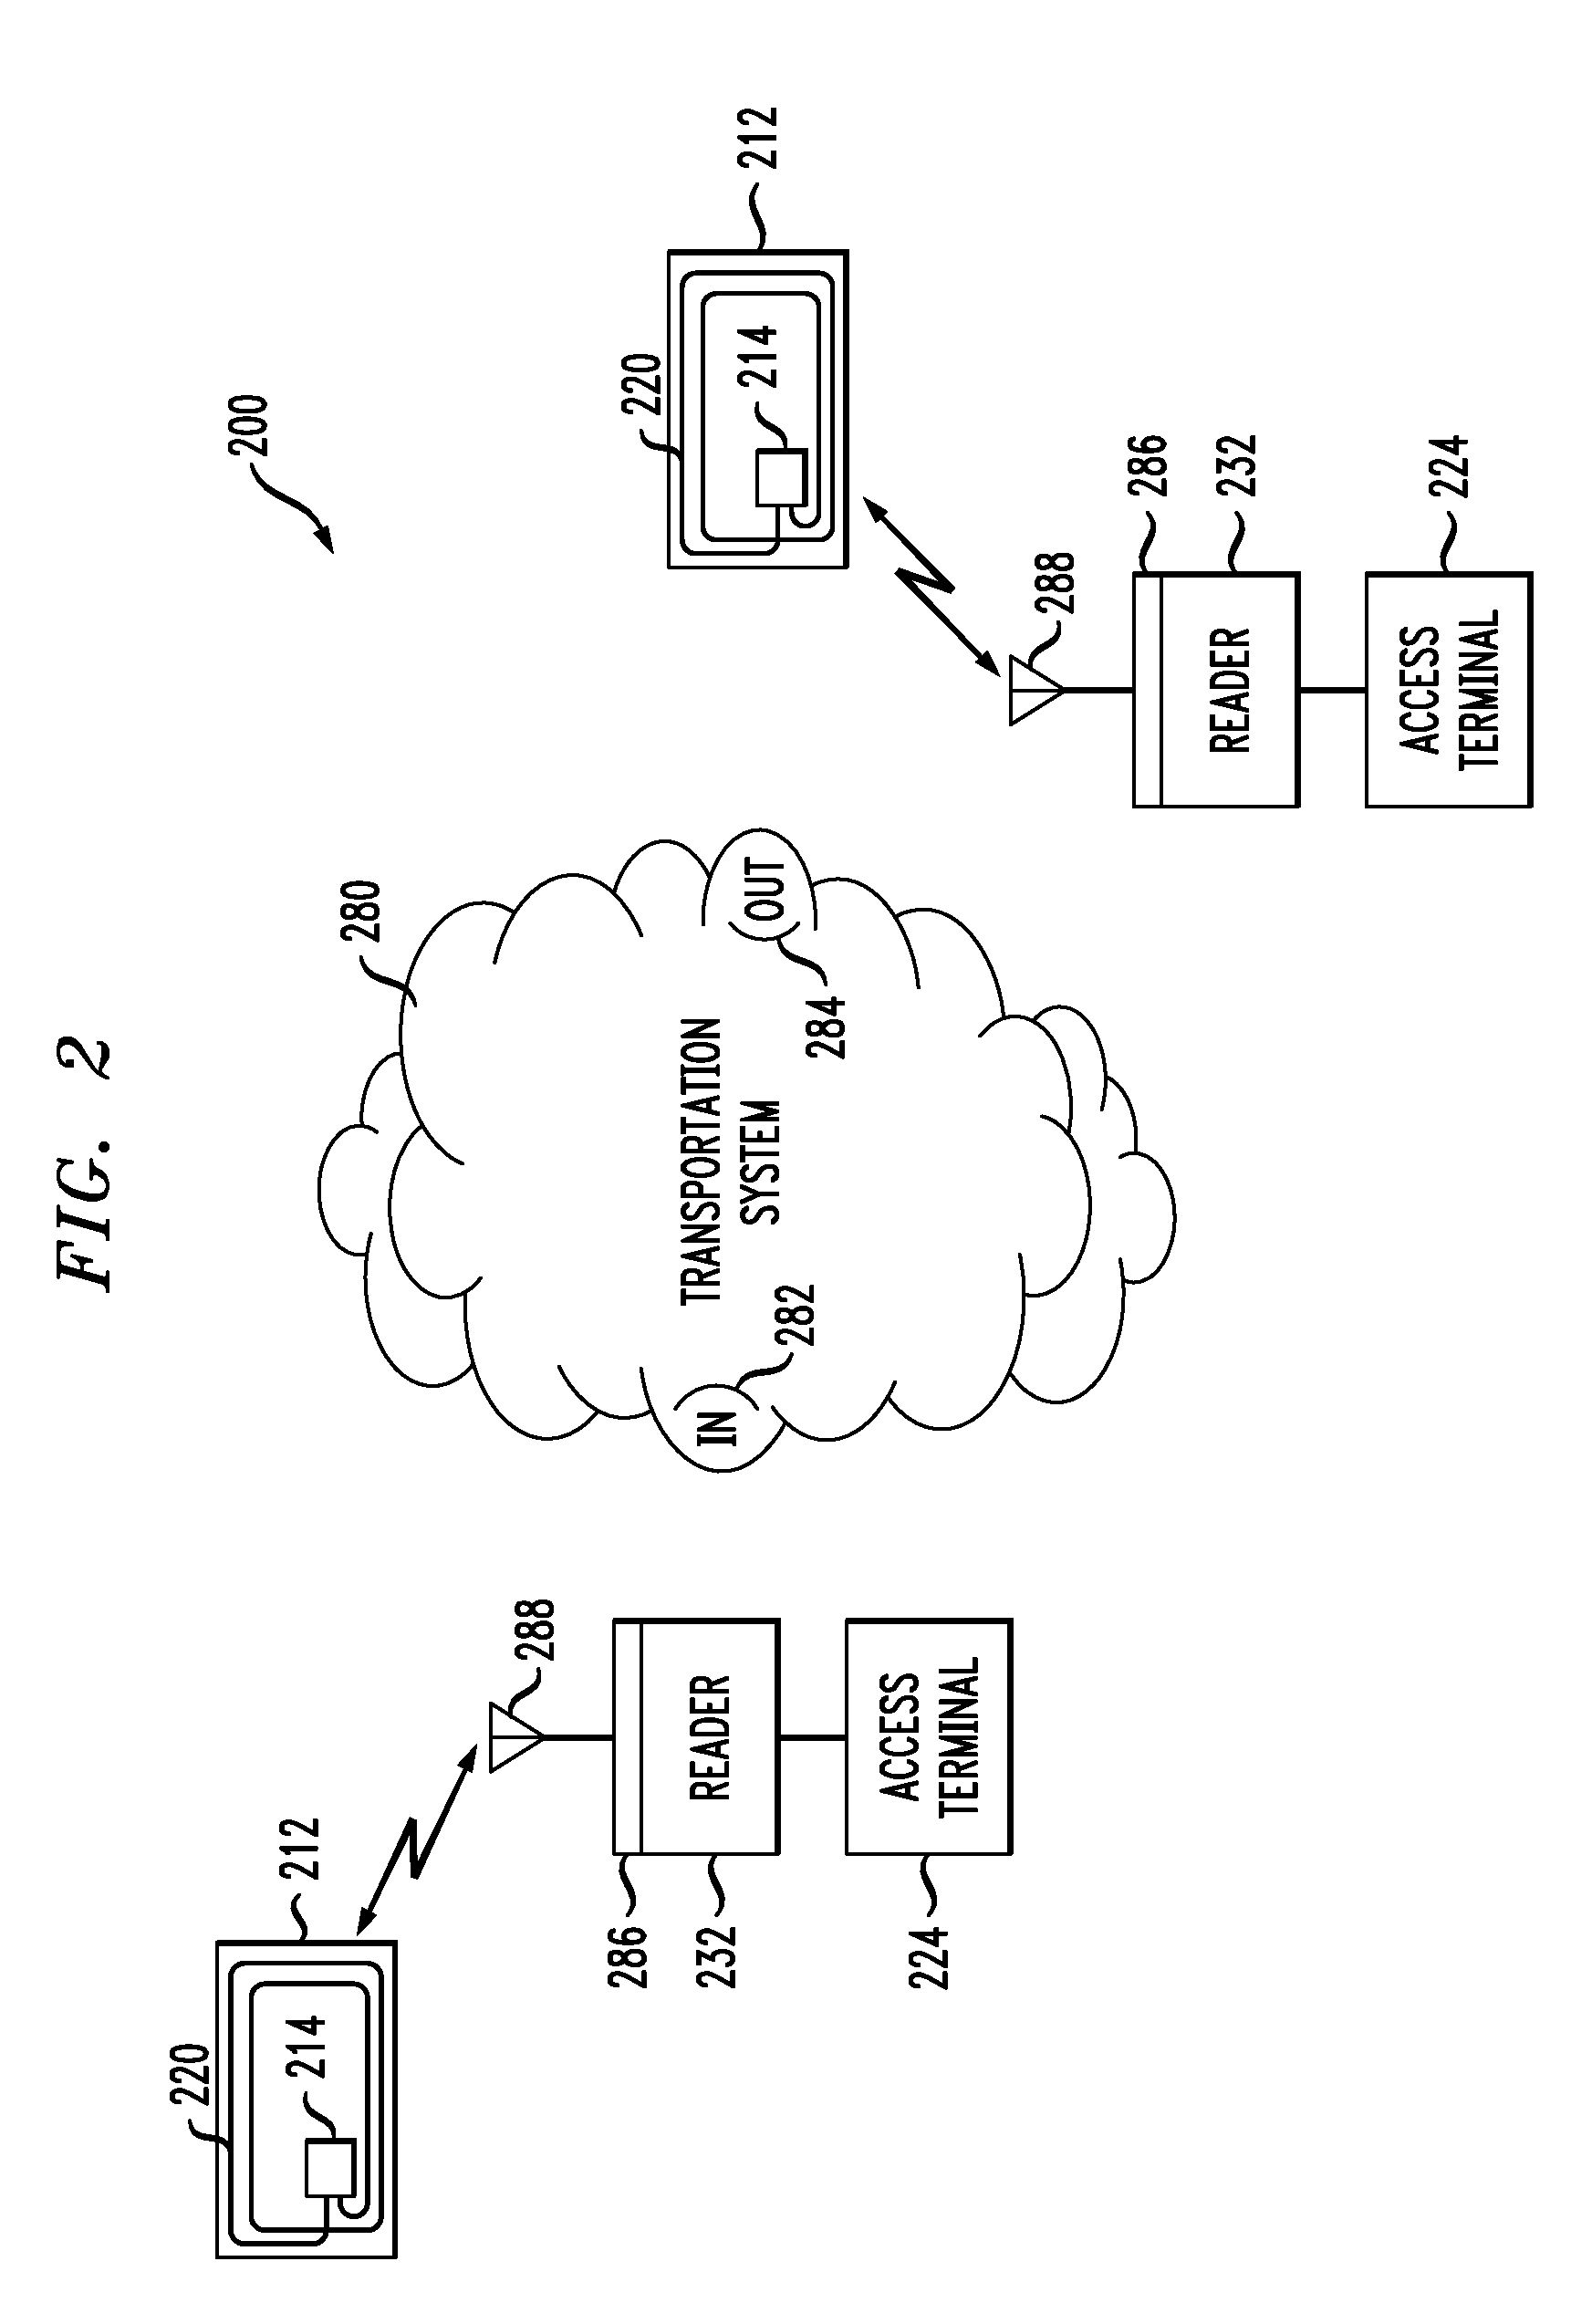 Method and Apparatus for Simplifying the Handling of Complex Payment Transactions